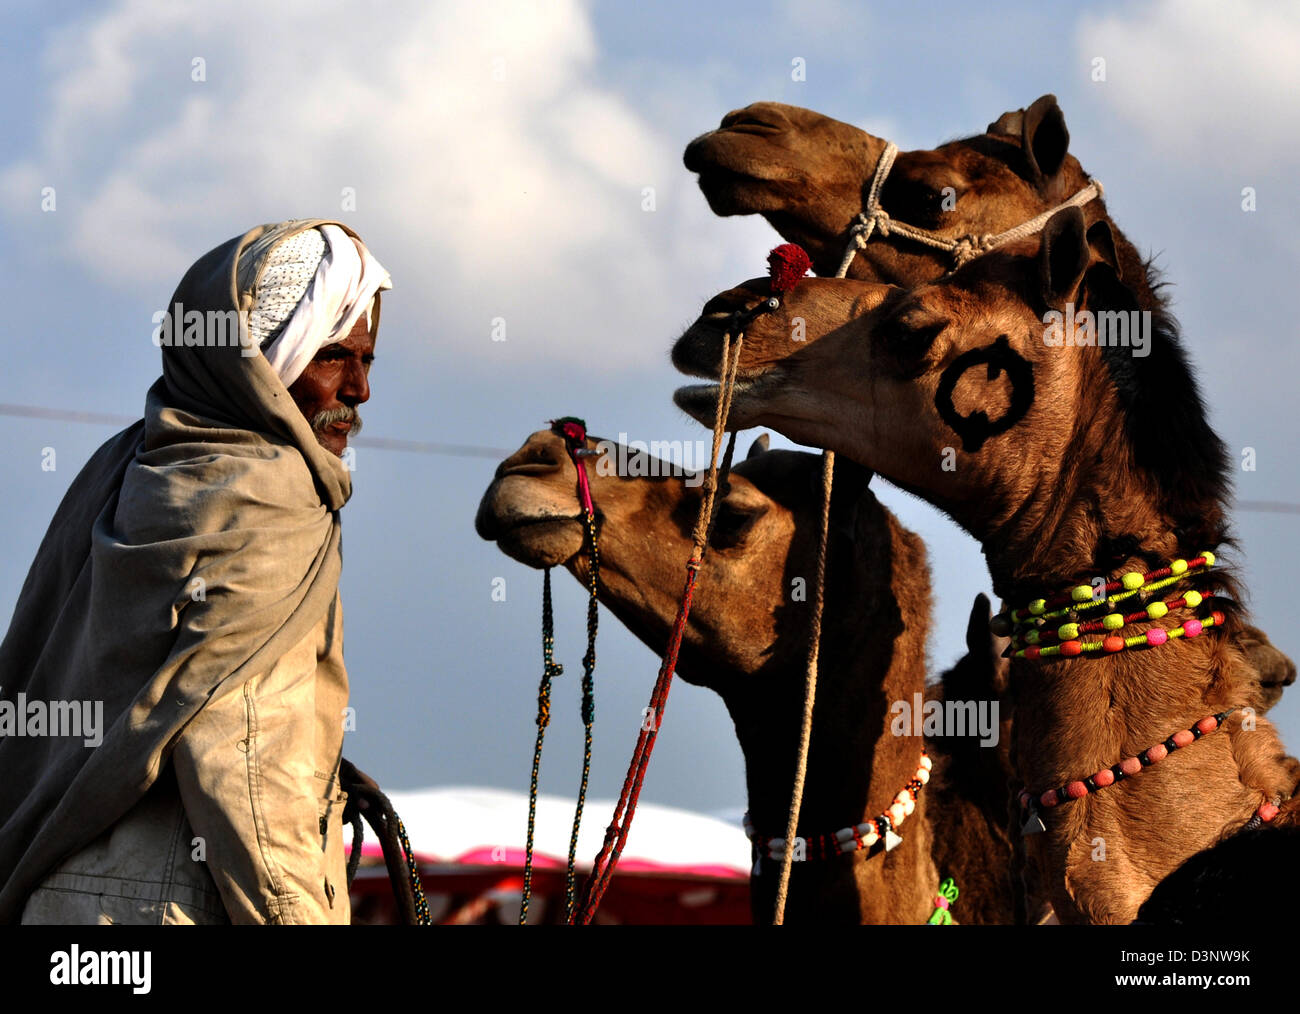 A seller looks for a purchaser during cattle fair in western Indian town of Nagaur, in Rajasthan state. Stock Photo